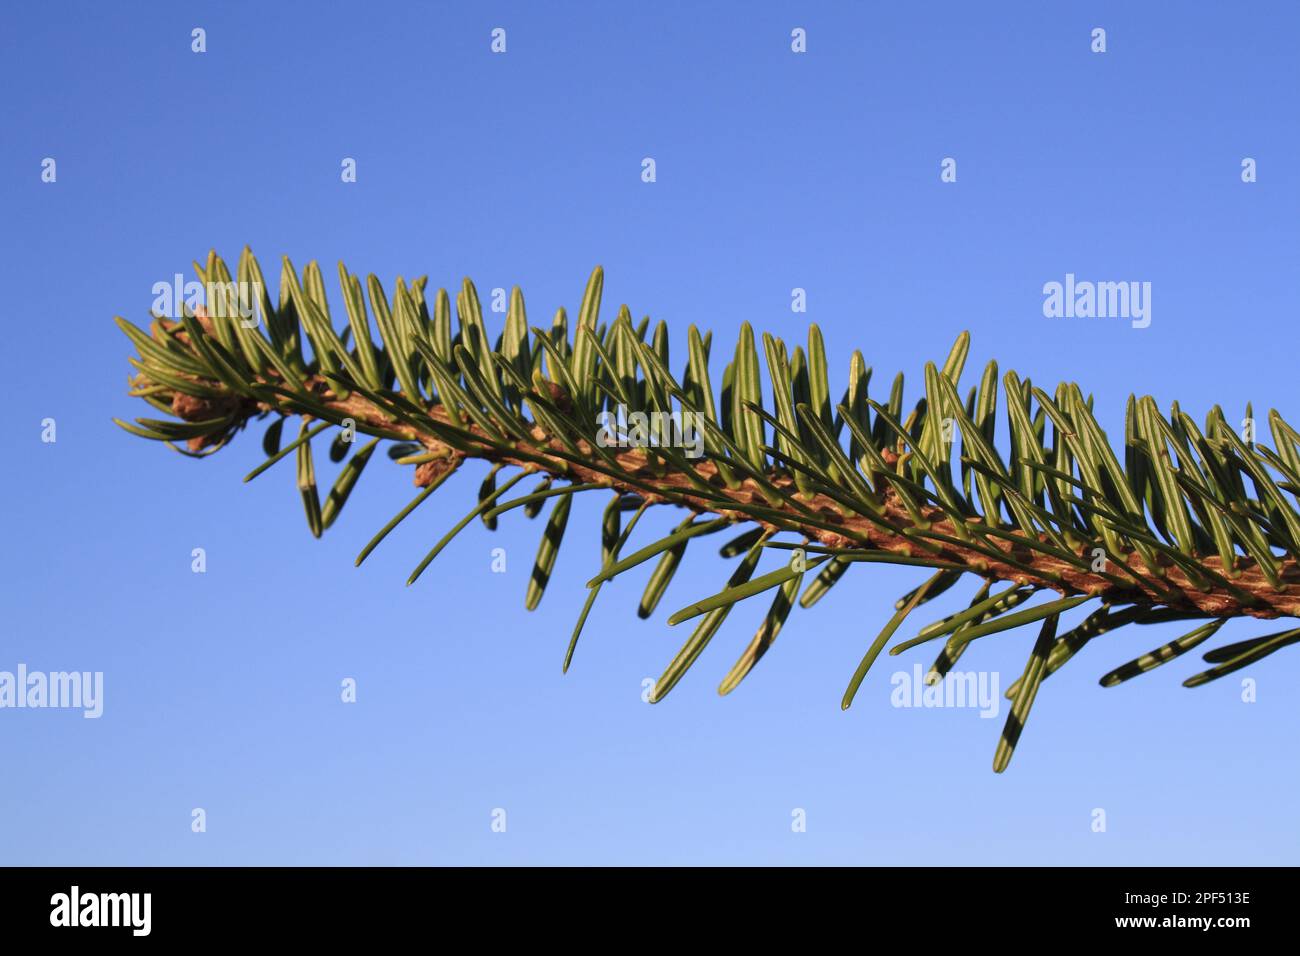 Nordmann Fir (Abies nordmanniana) close-up of needles, commerically grown christmas tree, Suffolk, England, United Kingdom Stock Photo